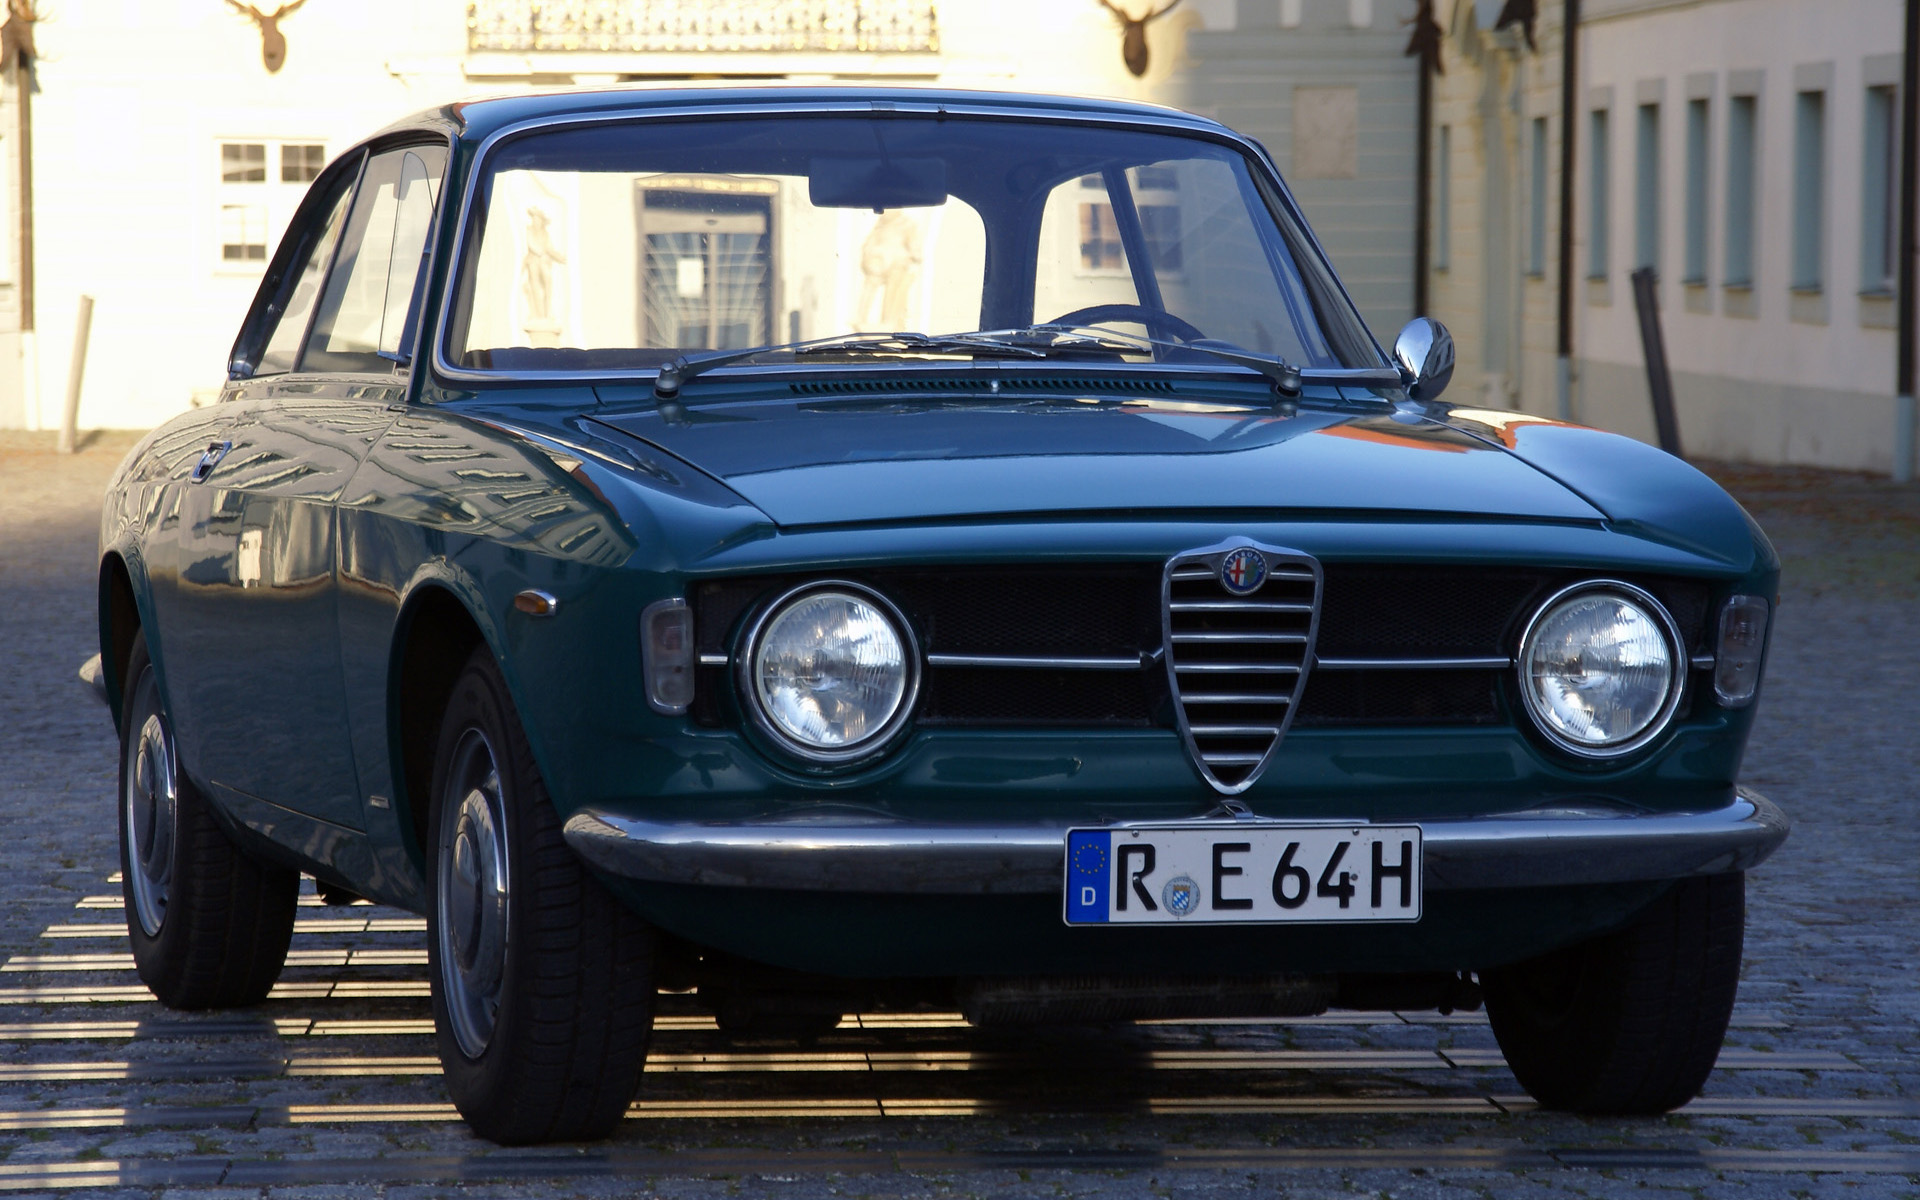 Alfa romeo giulia 1300 gt. Best photos and information of ...